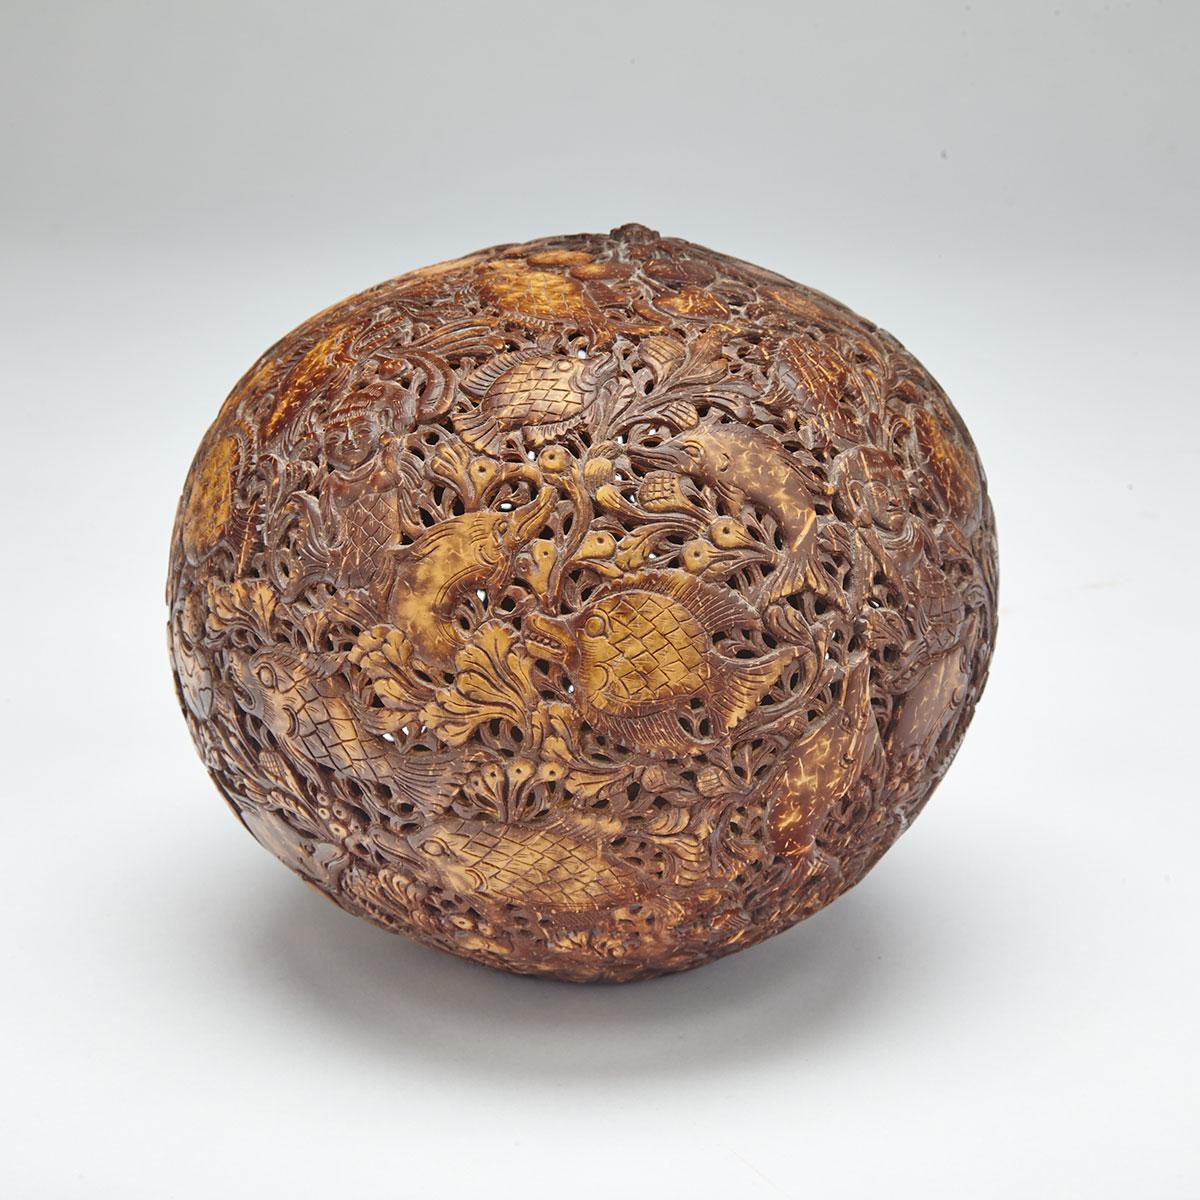 Balinese Pierce Carved Coconut Shell, mid 20th century